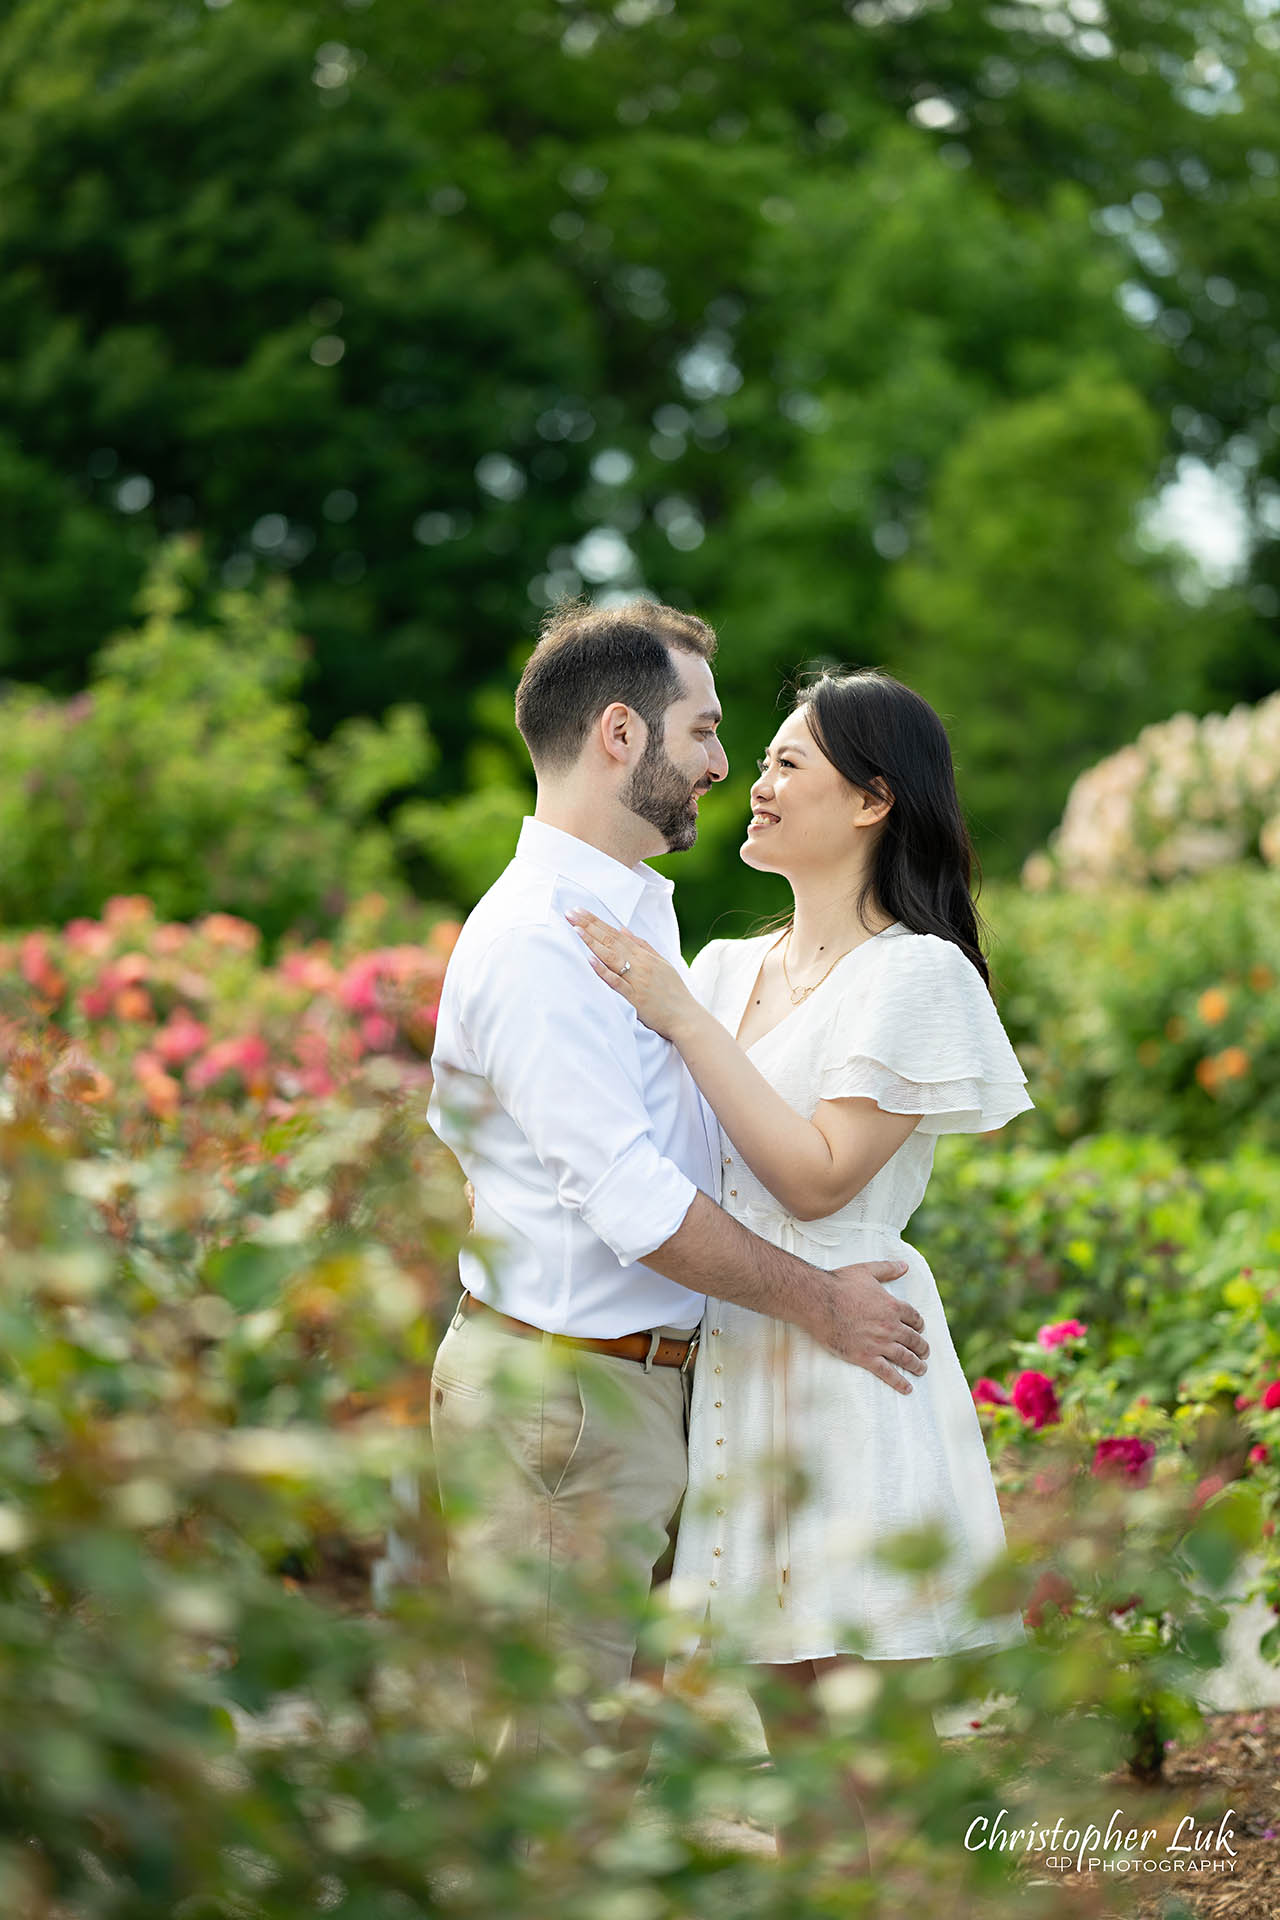 Bride with Groom Candid Natural Photojournalistic Organic Flower Garden Smile Portrait